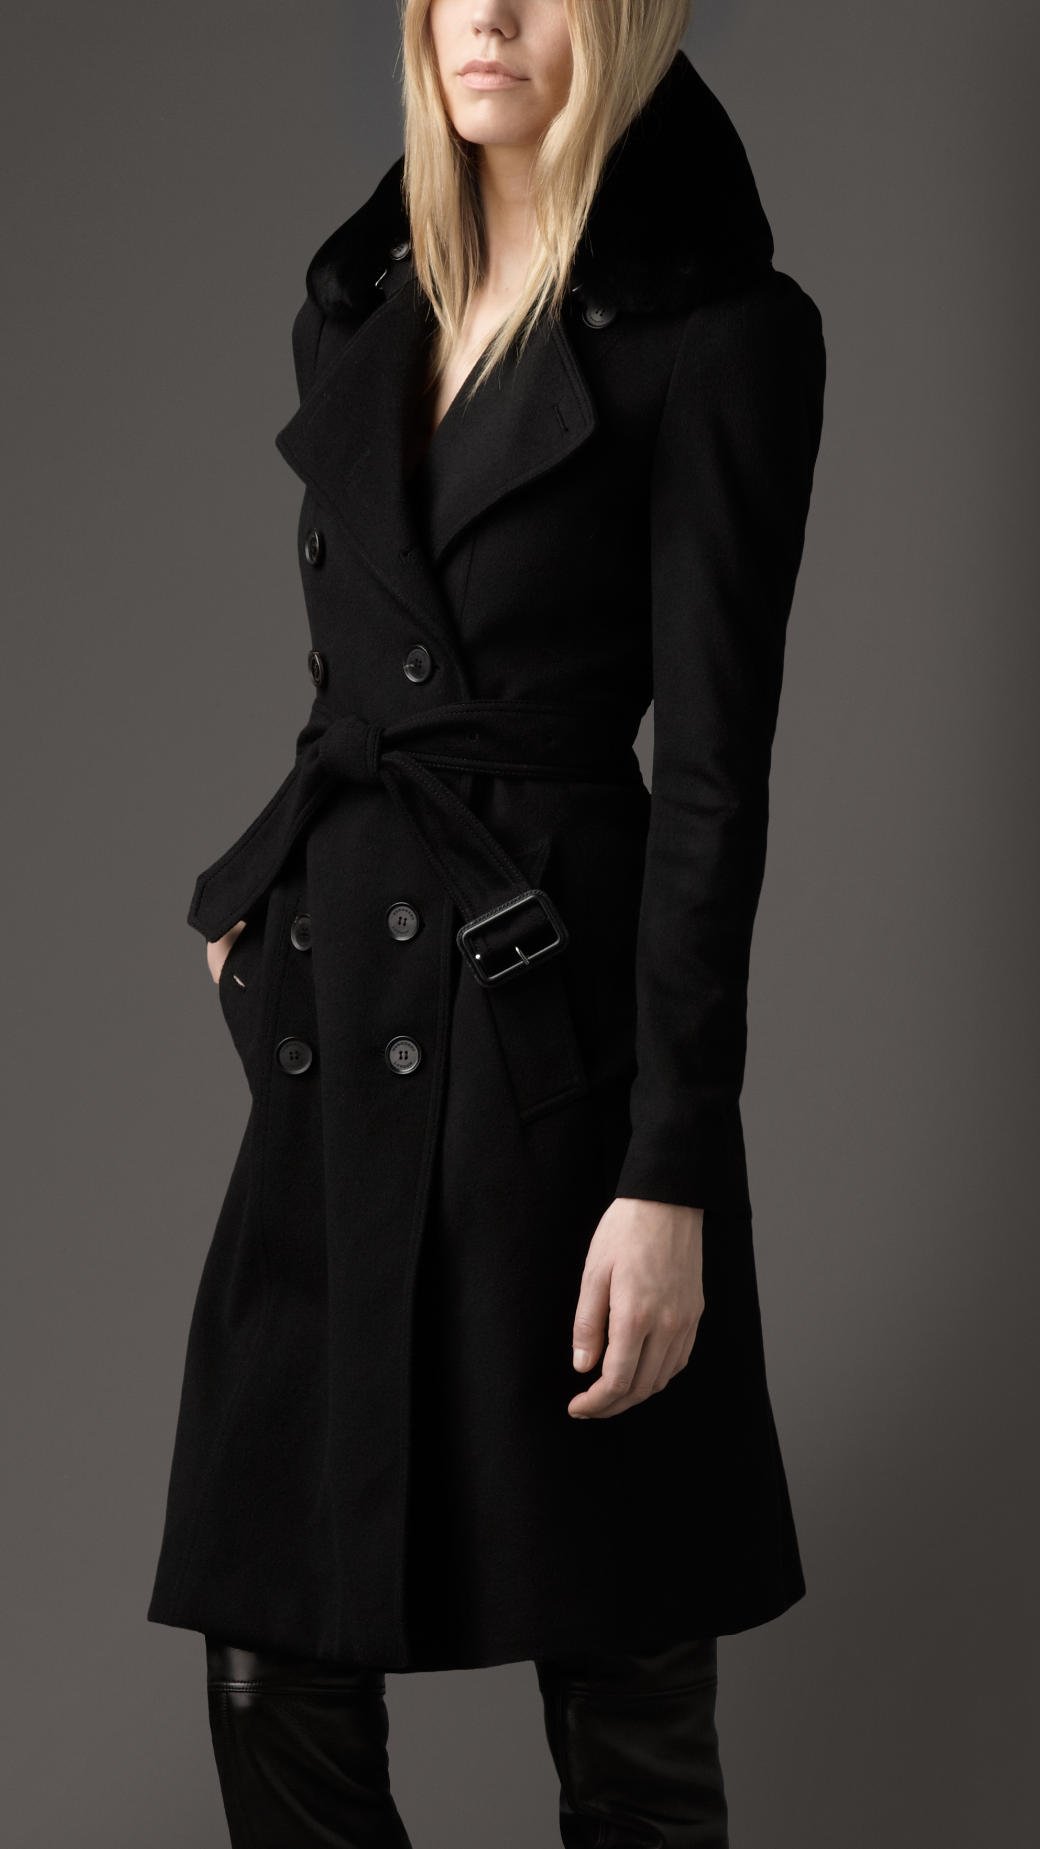 Lyst - Burberry Long Fur Collar Cashmere Trench Coat in Black